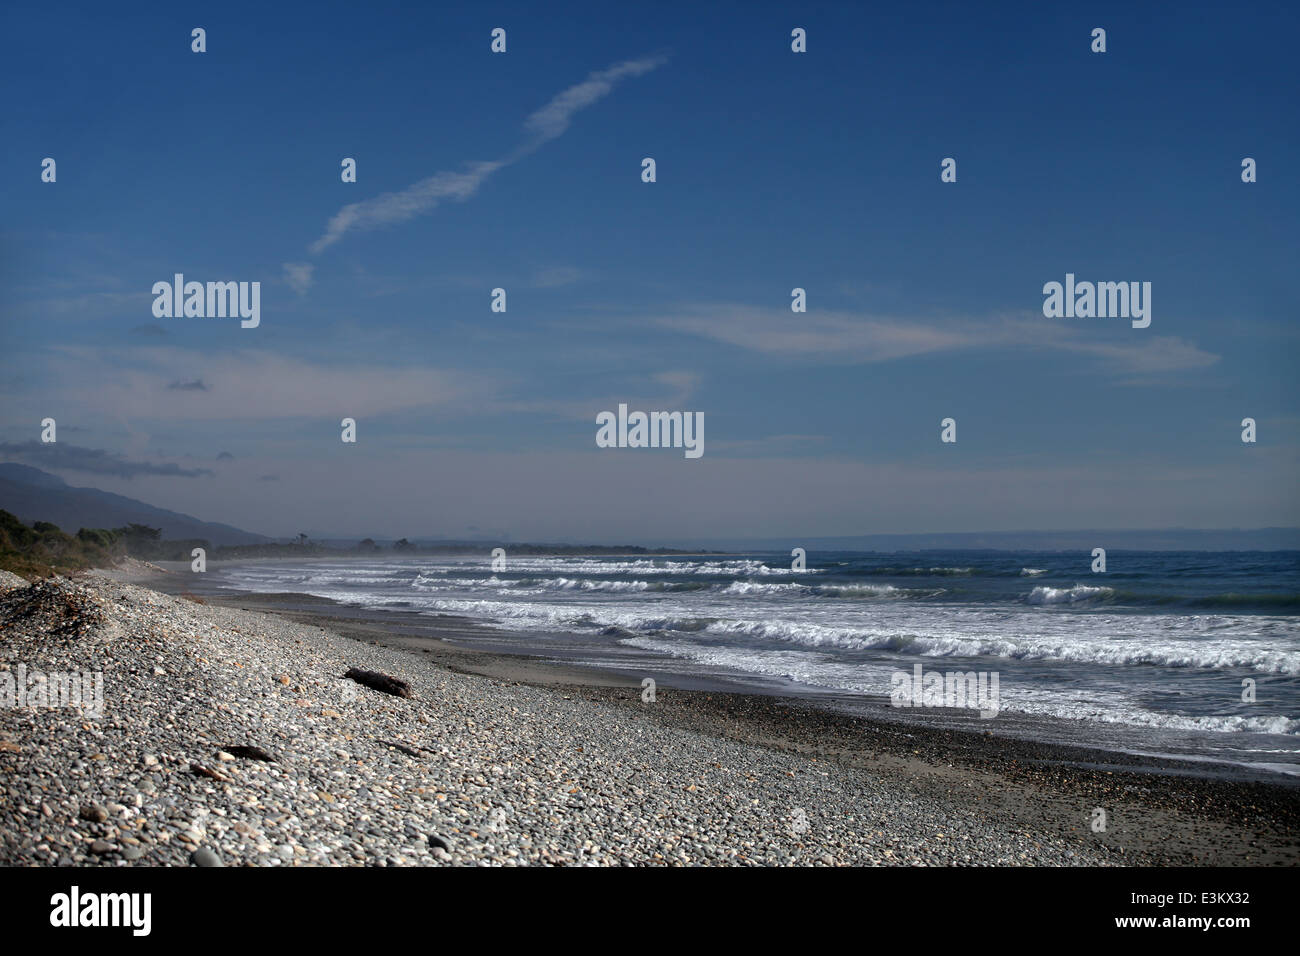 Beach at Granity on the West Coast of the South Island, New Zealand Stock Photo